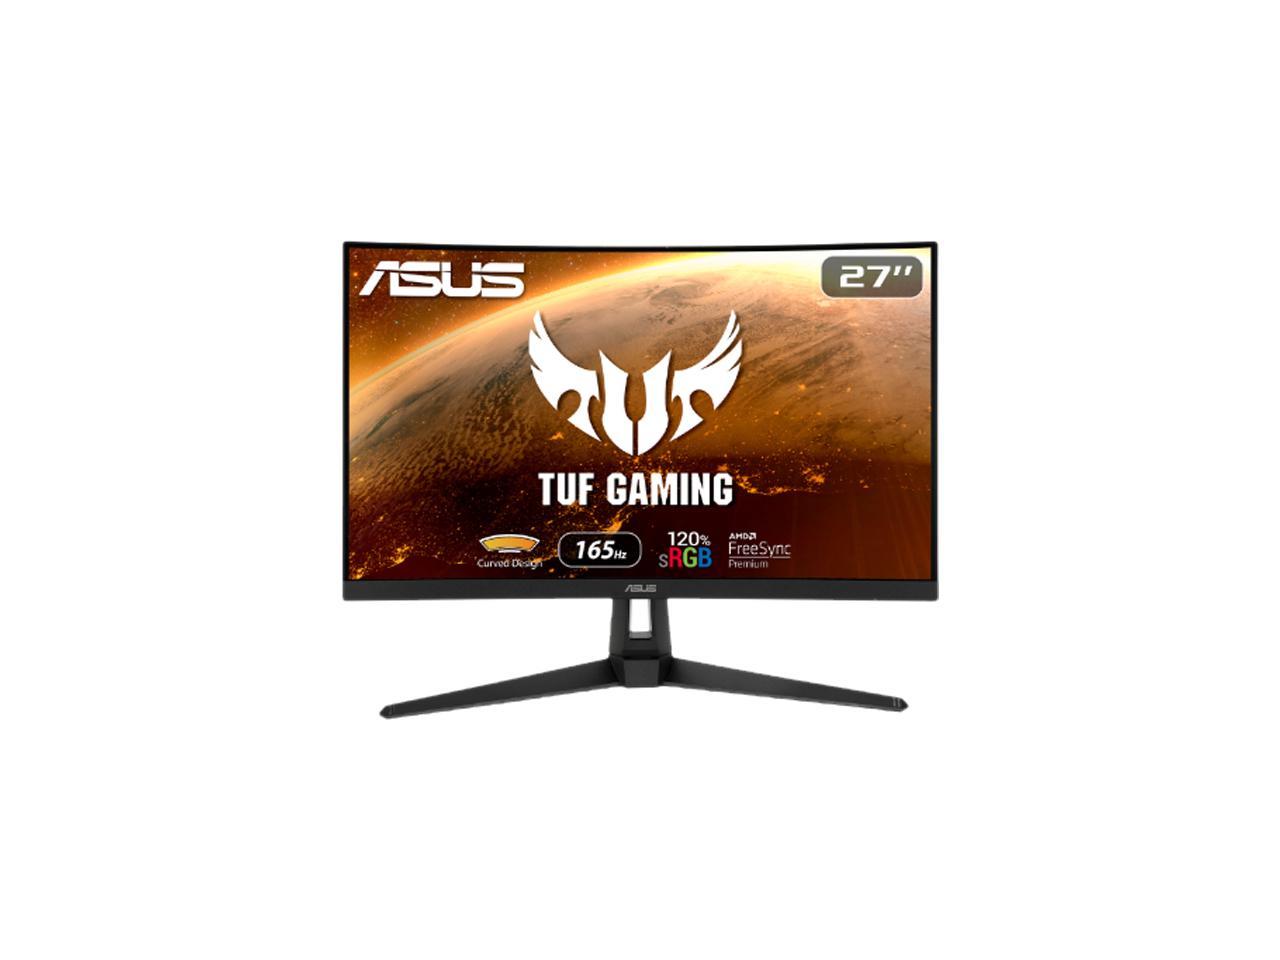 ASUS TUF Gaming VG27VH1B 27" Curved Monitor, 1080P Full HD, 165Hz (Supports 144Hz), Extreme Low Motion Blur, Adaptive-sync, FreeSync Premium, 1ms MPRT, Eye Care, HDMI D-Sub